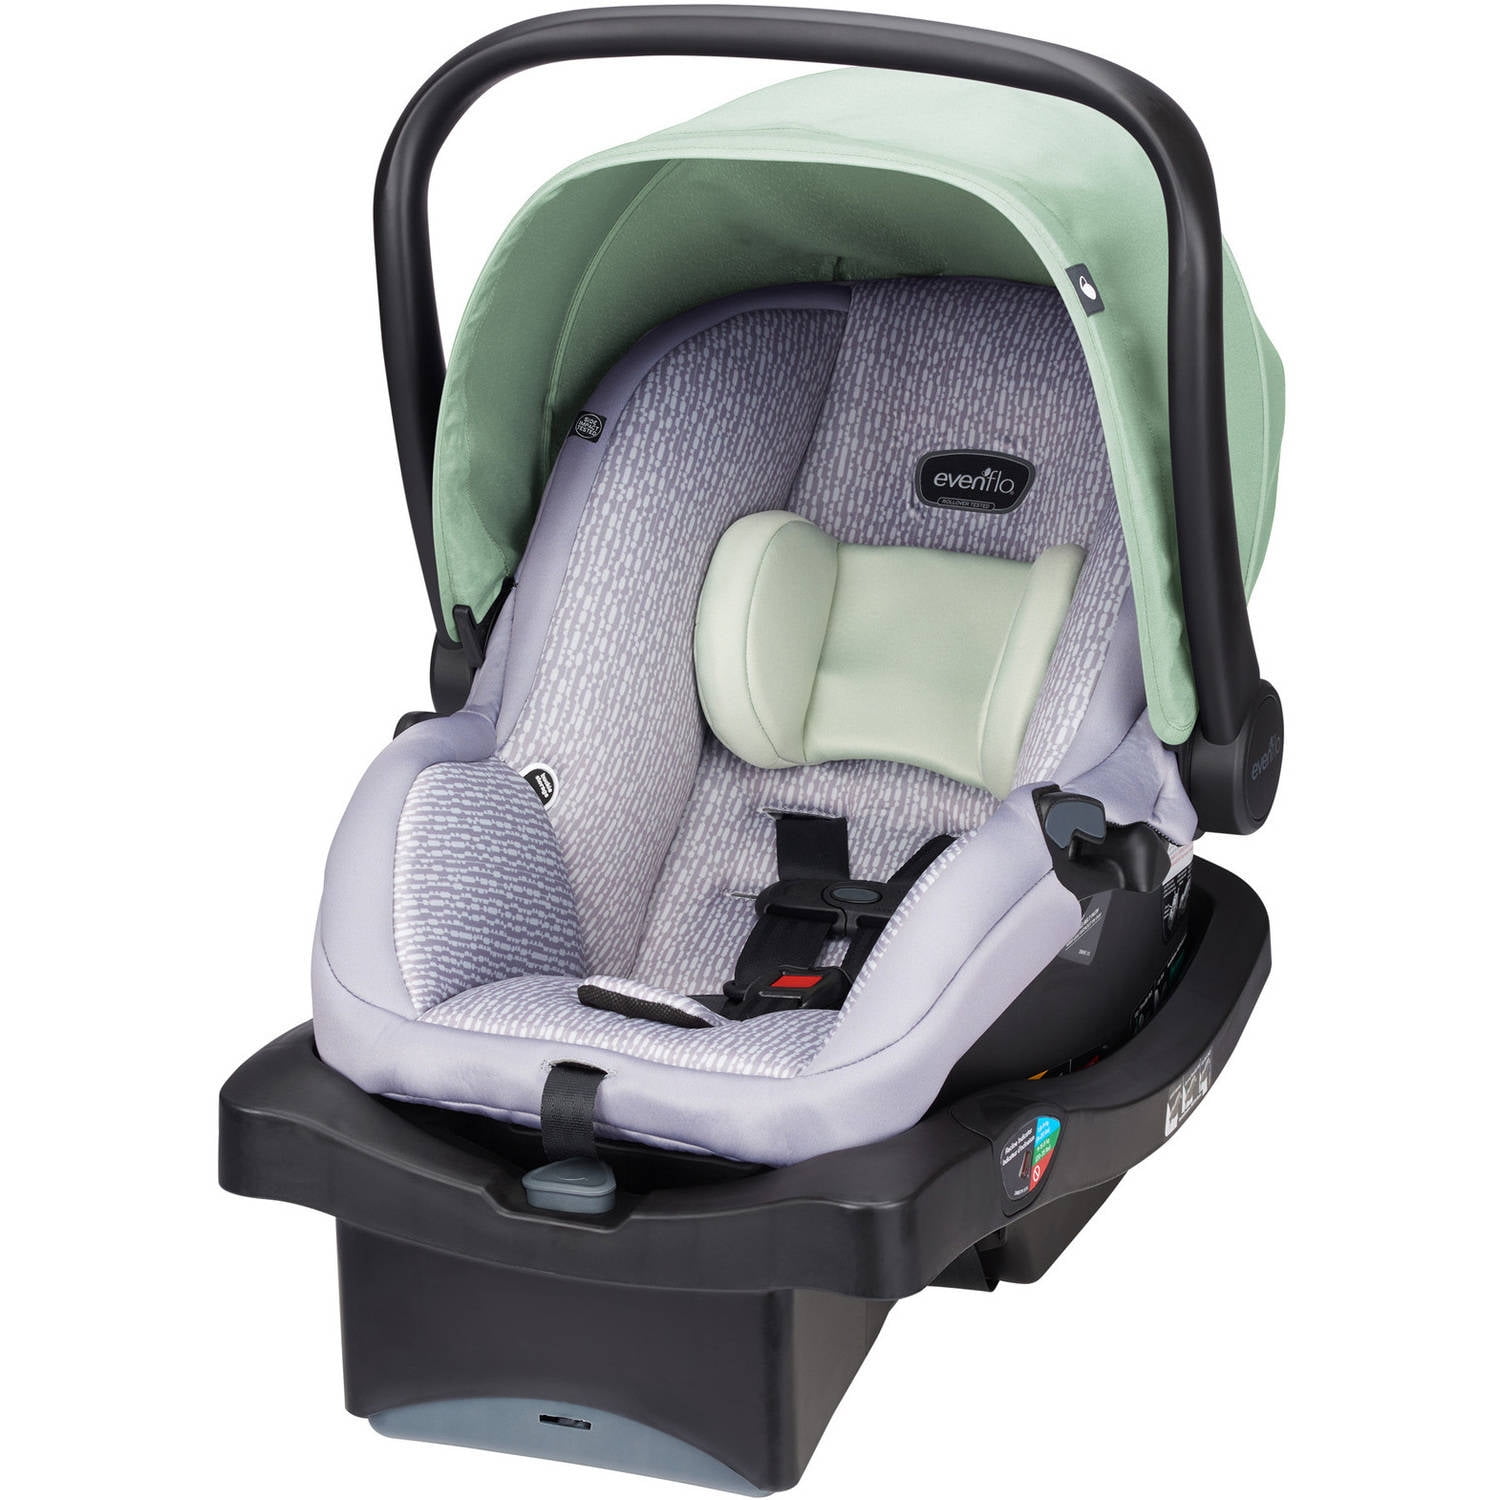 evenflo car seat and stroller combo walmart